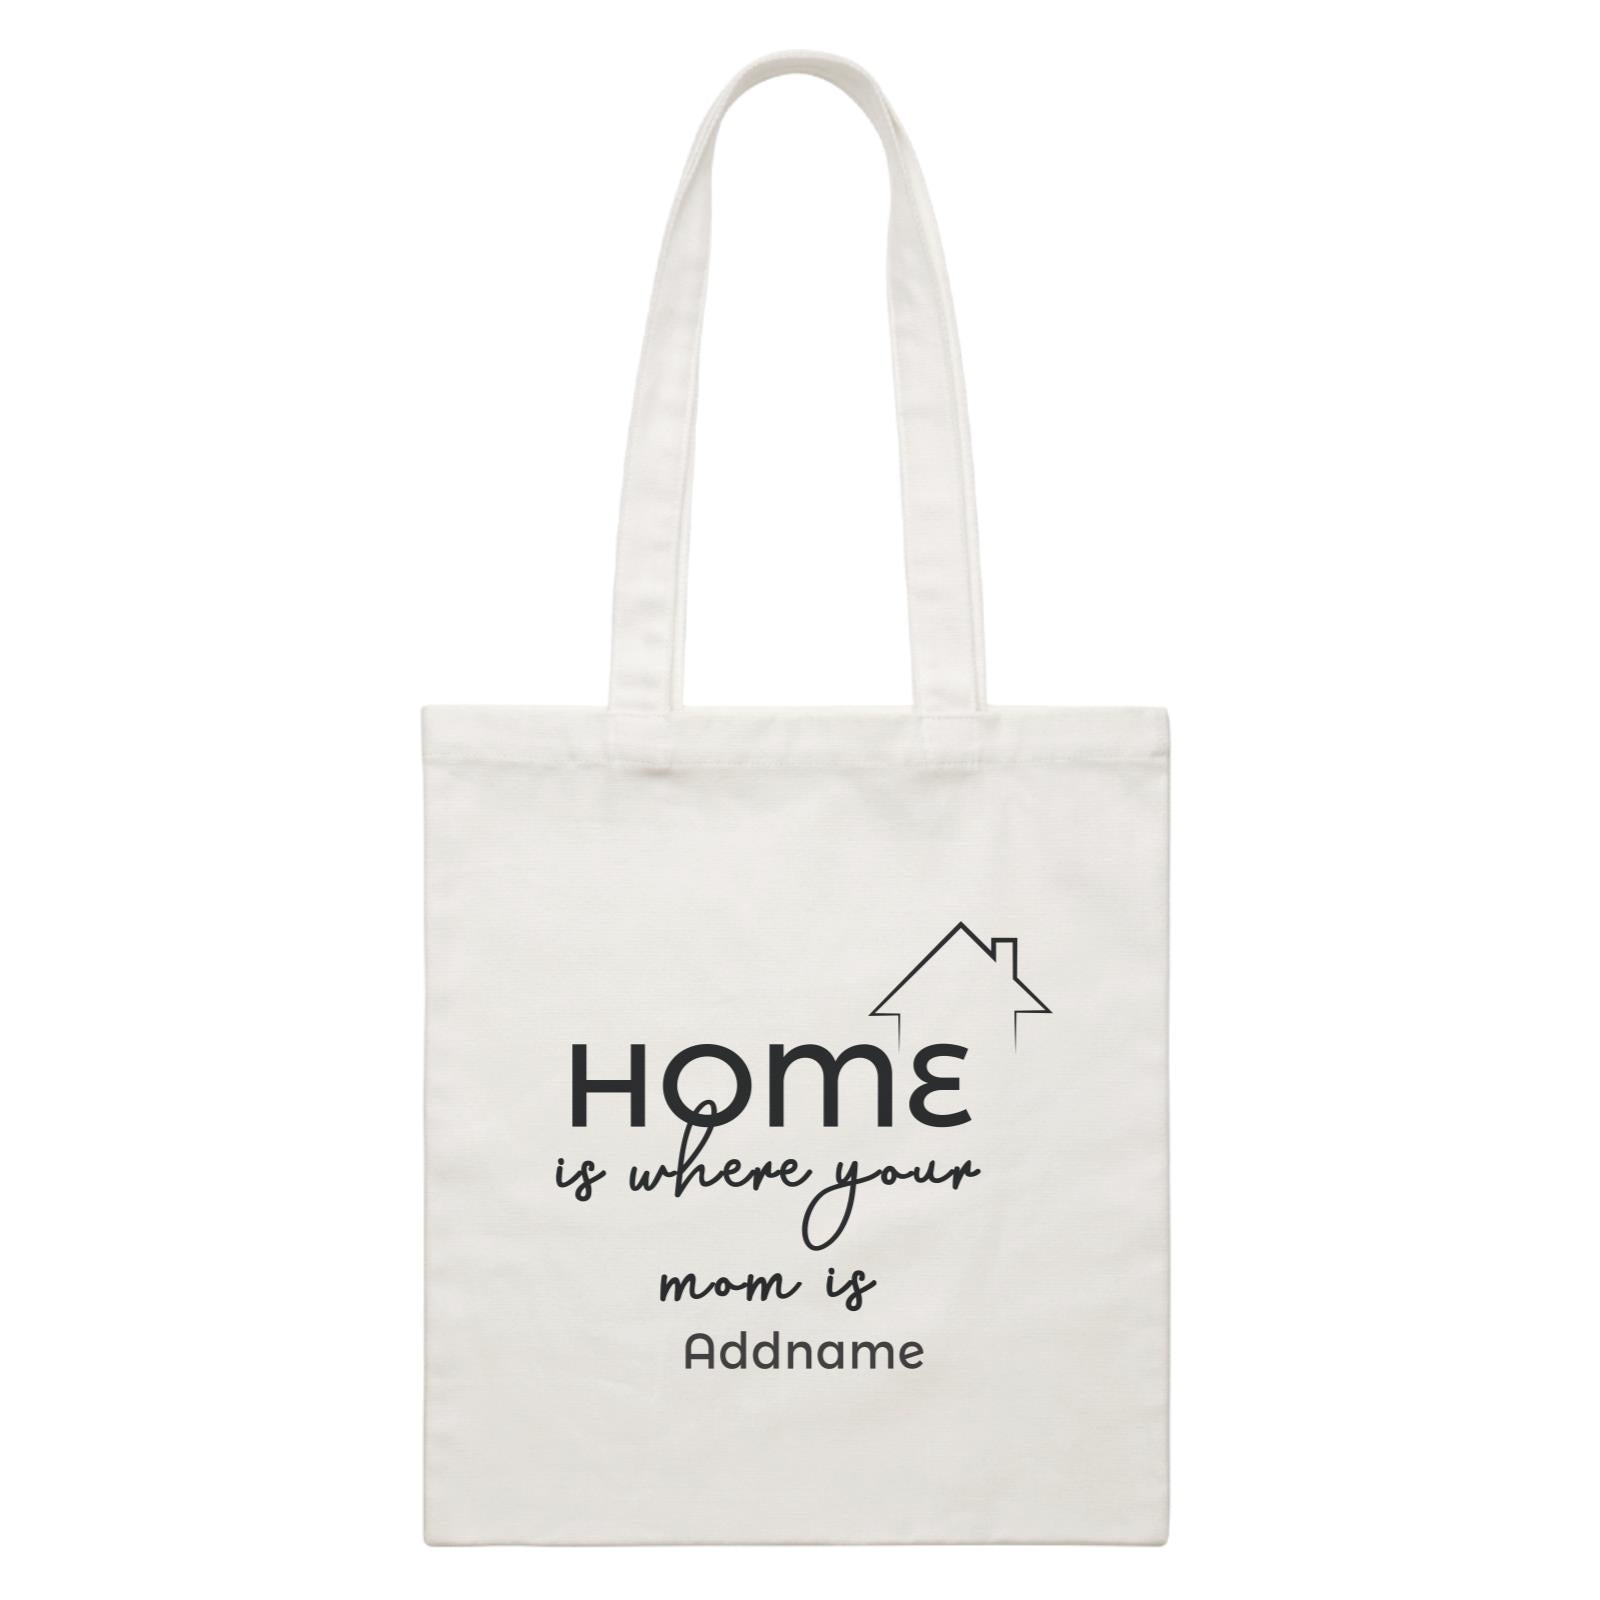 Girl Boss Quotes Home Is Where Your Mom Is Addname White Canvas Bag